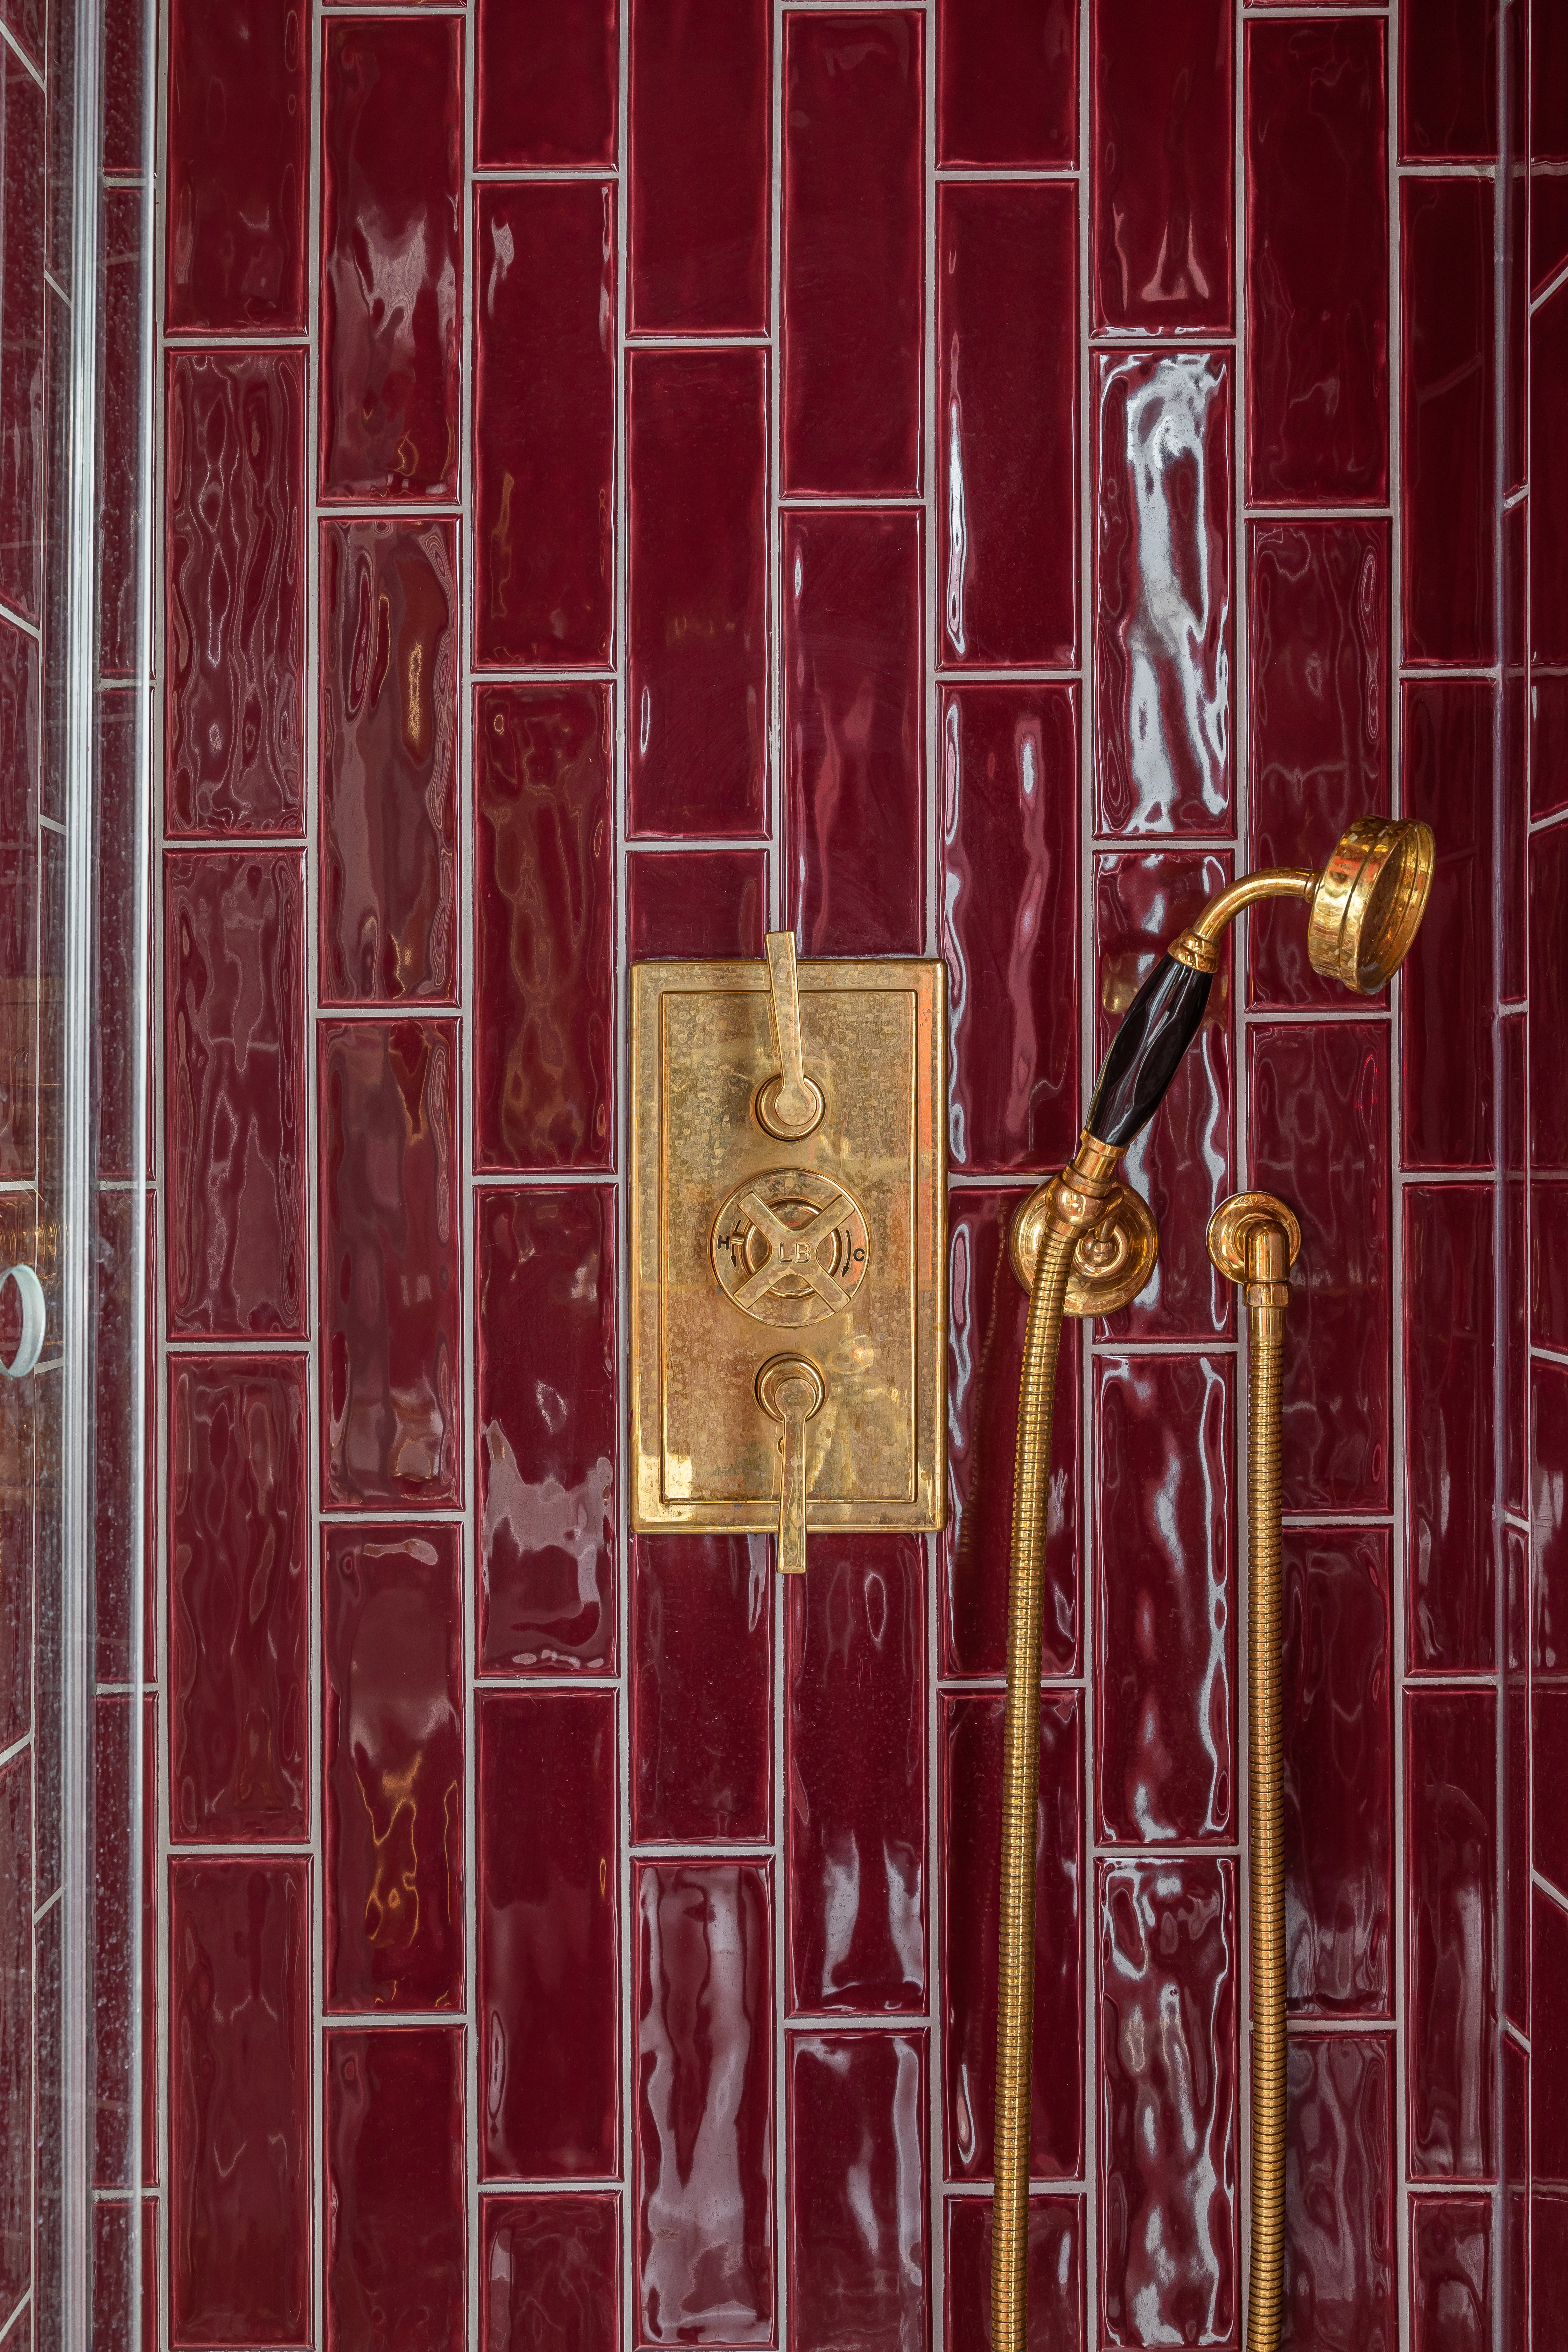 For taps and fixtures that you use daily, choosing high-quality polished brass or chrome is a worthwhile investment